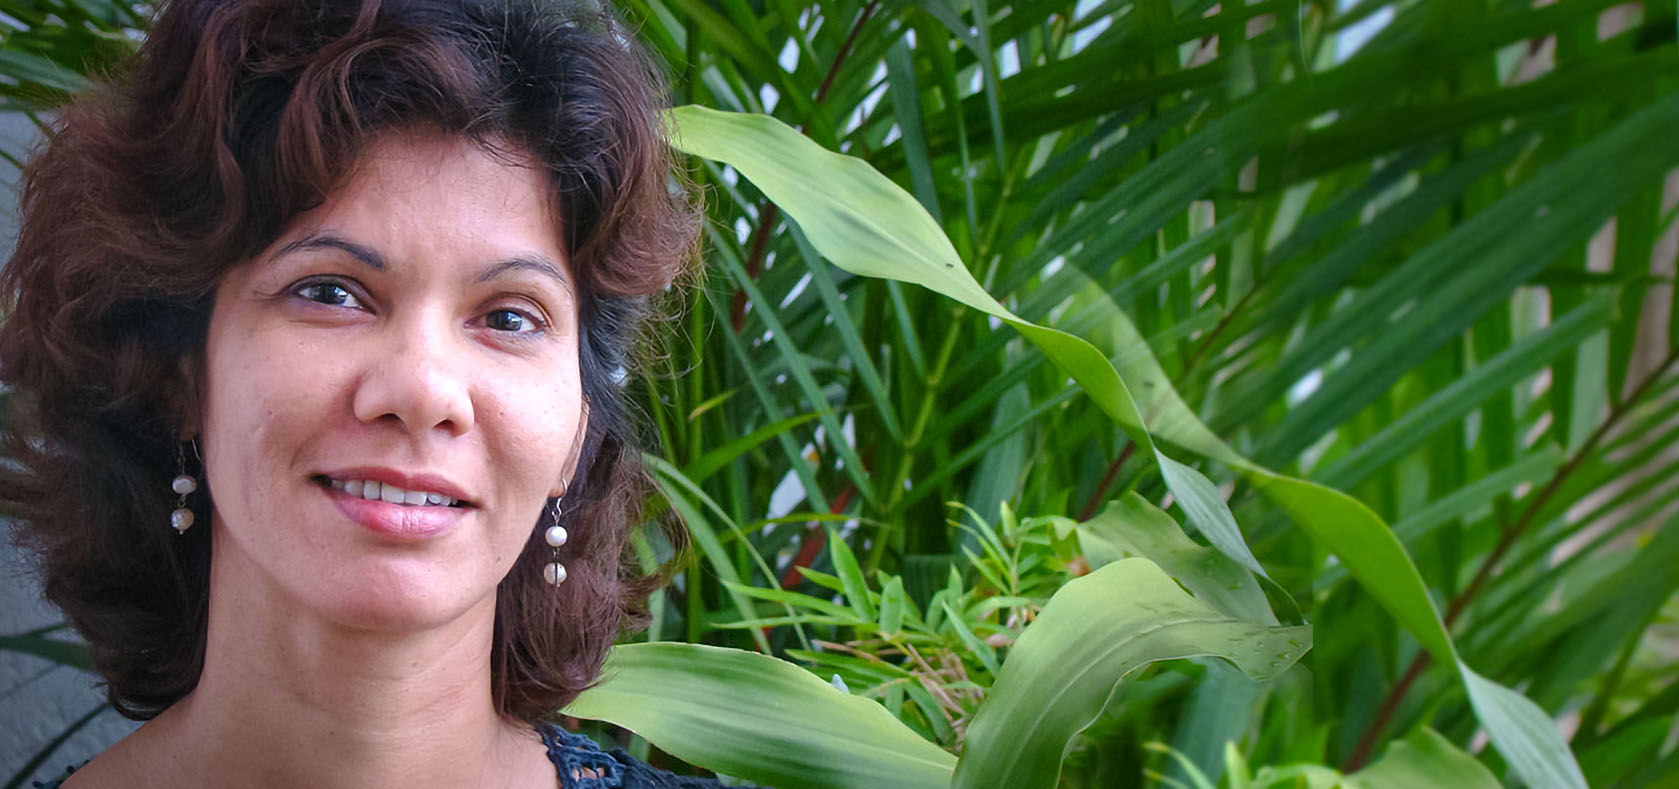 Shreen Saroor runs the Women’s Action Network (WAN) in Sri Lanka, a collective of women’s groups that empowers and advocates for women and women survivors of war, violence and other injustices. Photo: Courtesy of Shreen Saroor